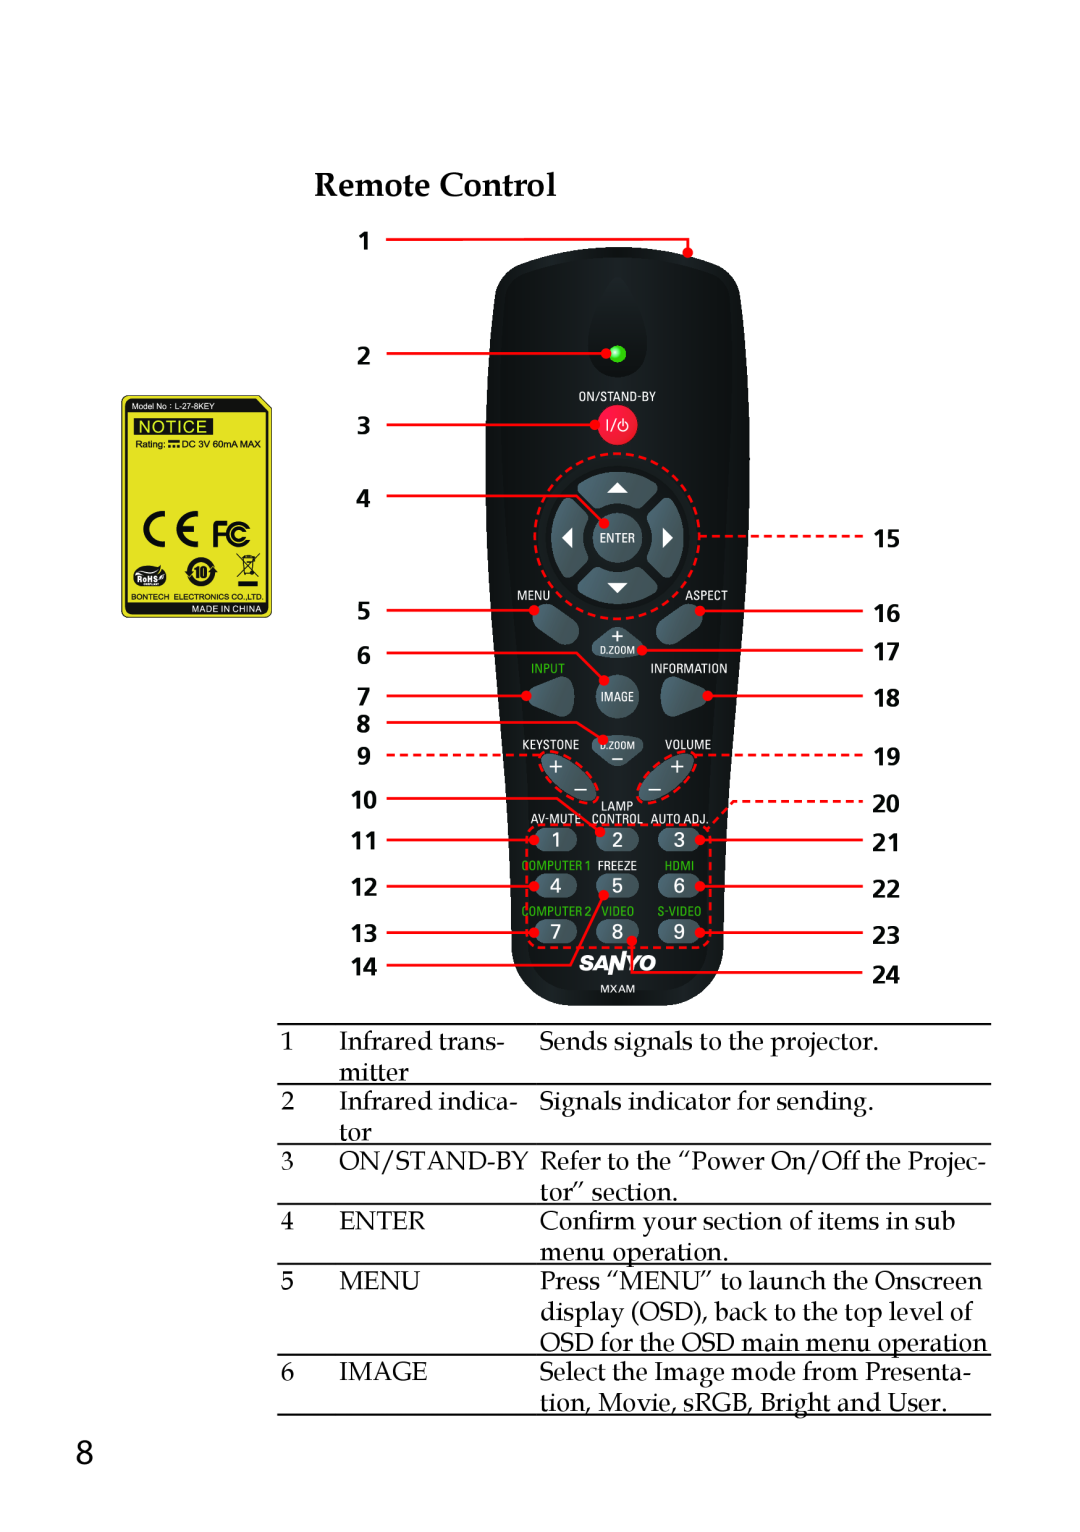 Sanyo PDG-DWL100 Remote Control, Confirm your section of items in sub, menu operation, Press “MENU” to launch the Onscreen 